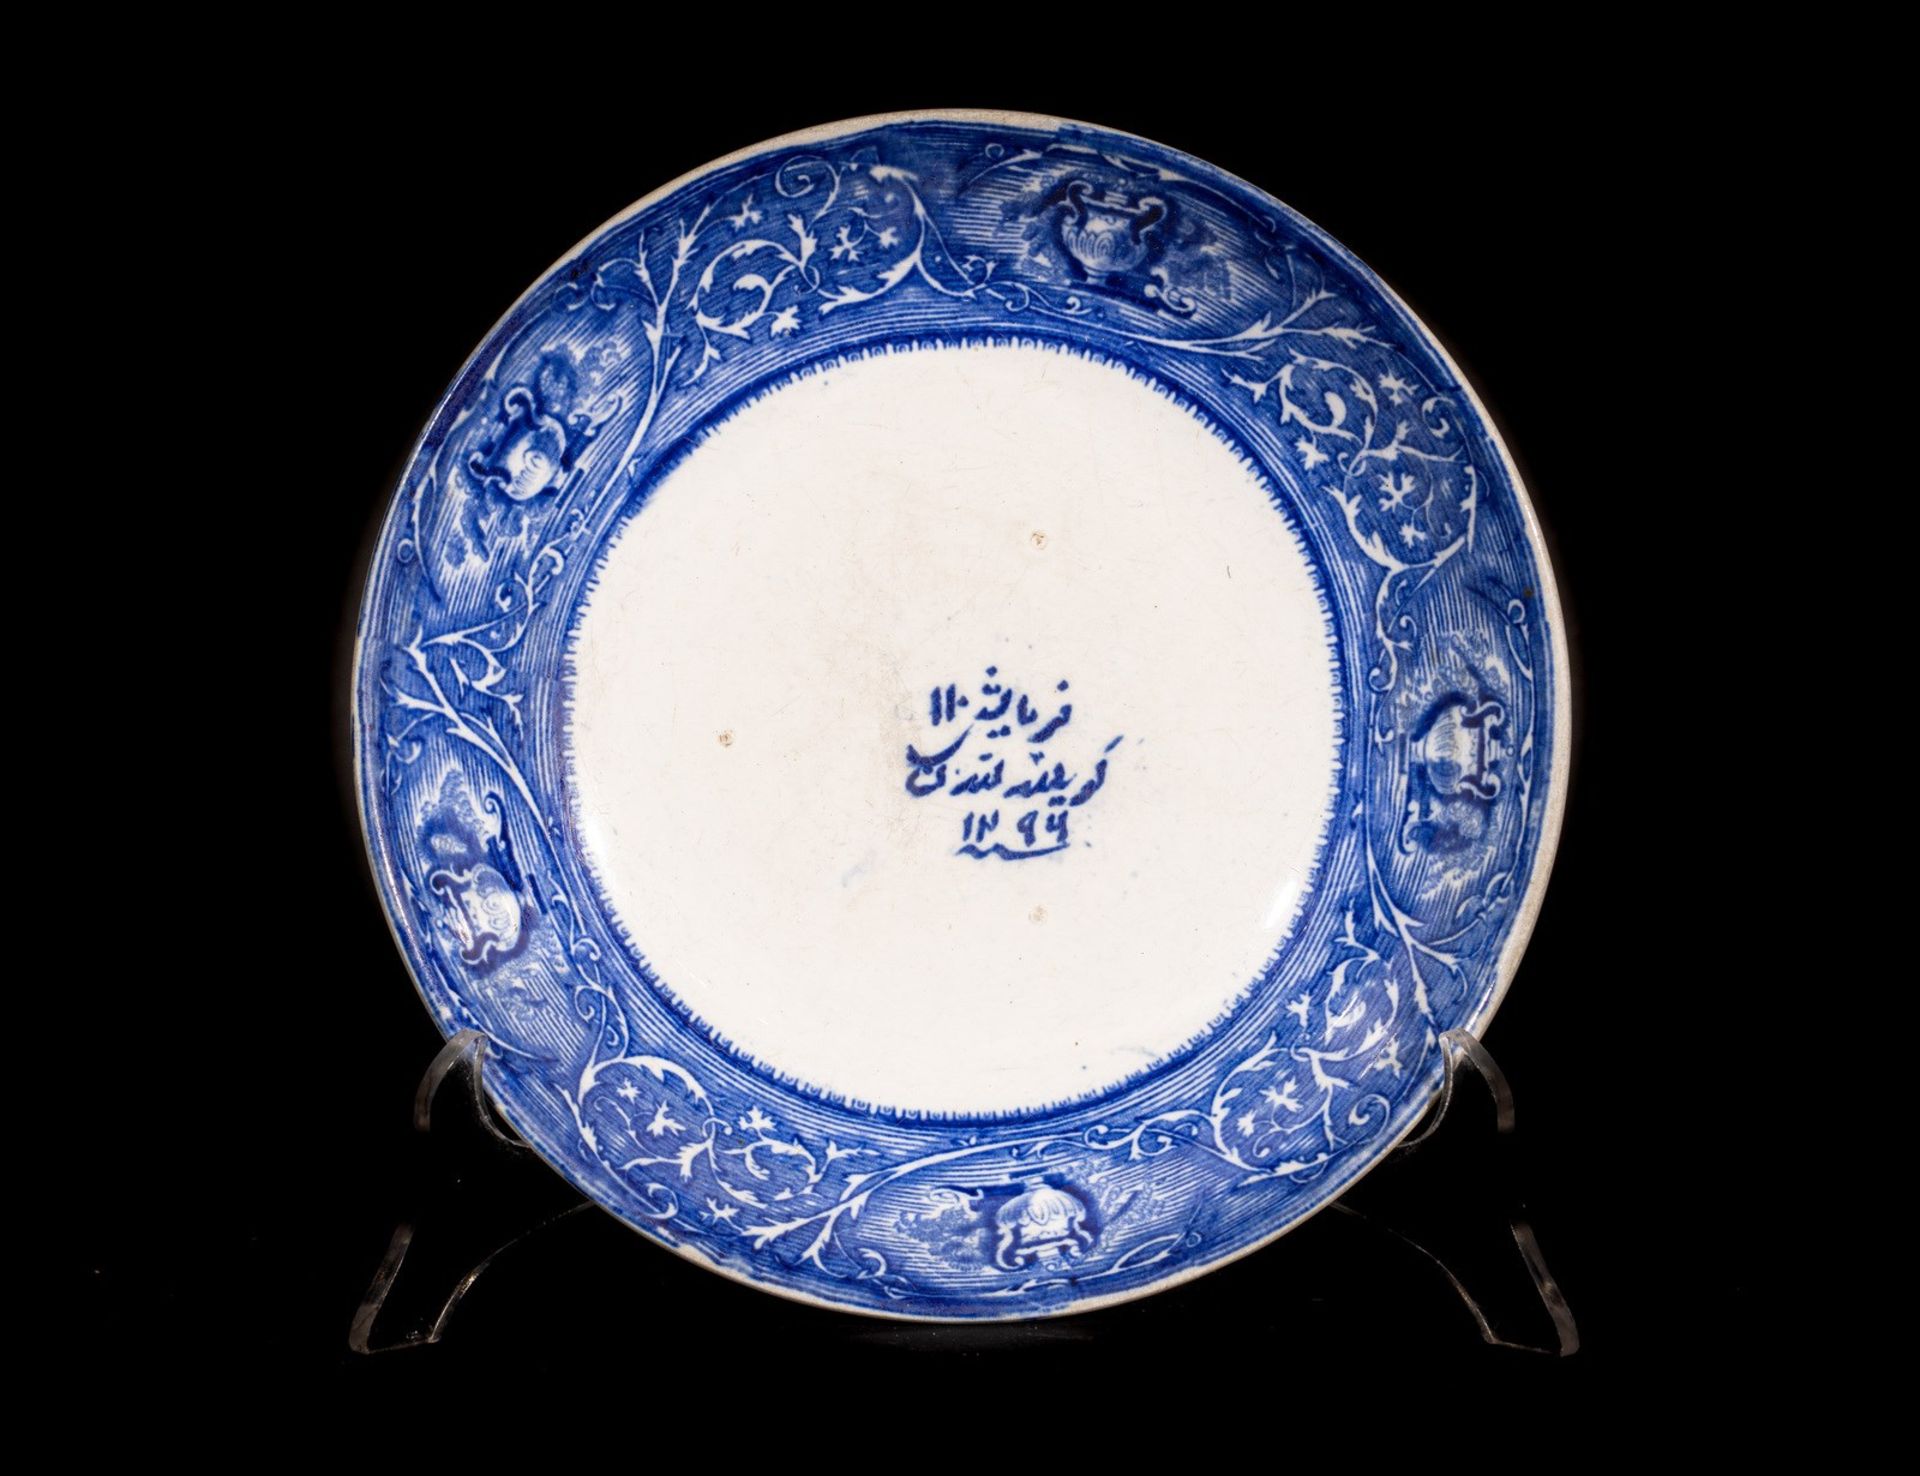 Arte Islamica A blue and white "China Bone" pottery dish. Signed and dated 1294 AH (1877 AD).